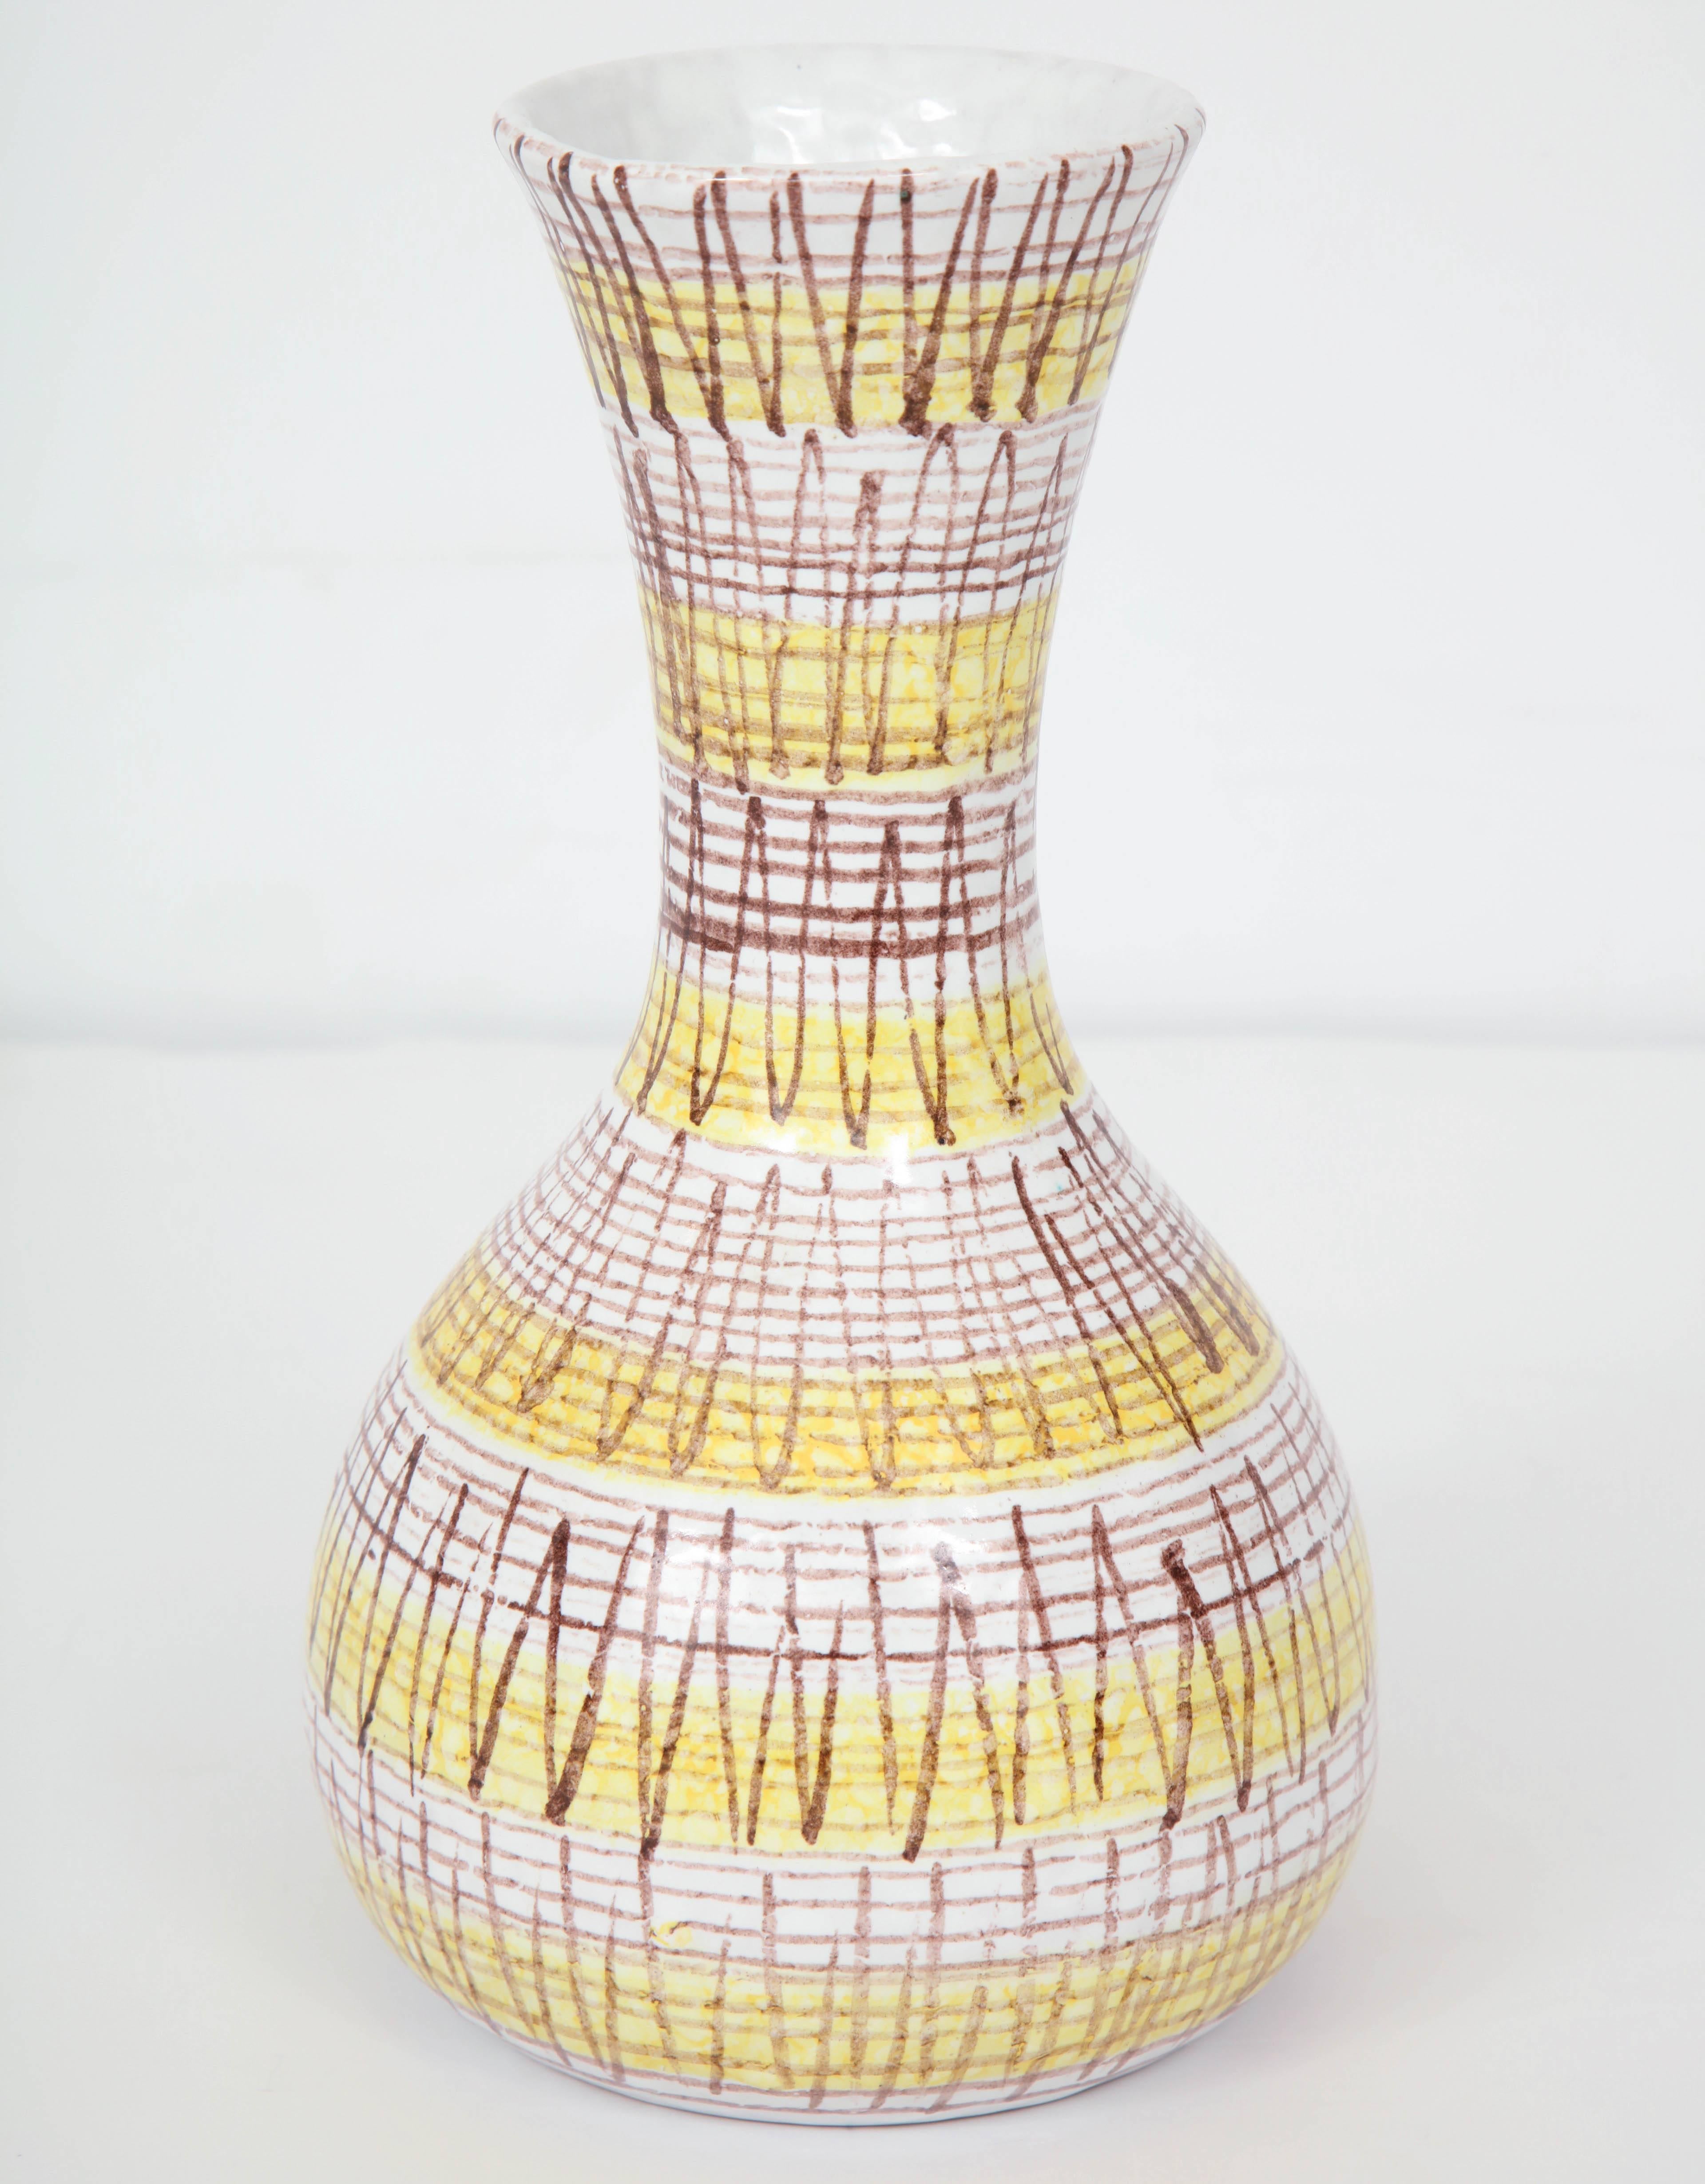 Decorative yellow and brown striped vase, circa 1950, Italy.